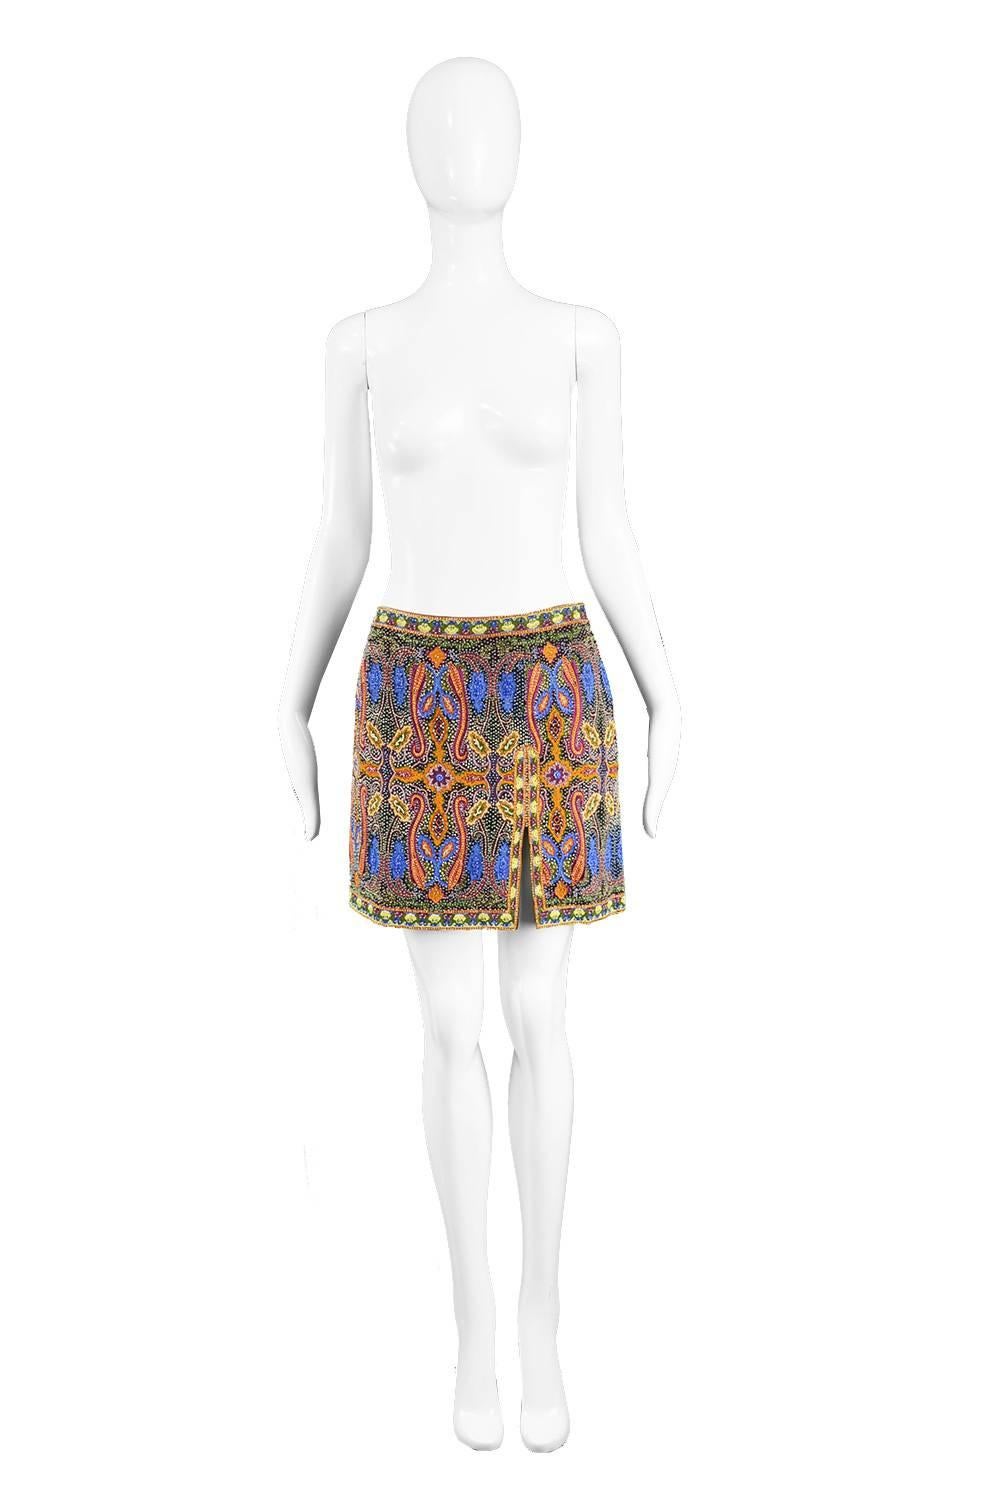 Escada Vintage Intricately Embroidered and Beaded Mini Skirt, 1990s

Size: EU 38 / UK 10 / US 6. Please check measurements.
Waist - 28” / 71cm
Hips - up to 36” / 91cm
Length (Waist to Hem) - 16” / 30cm

Condition: Excellent Vintage Condition - No